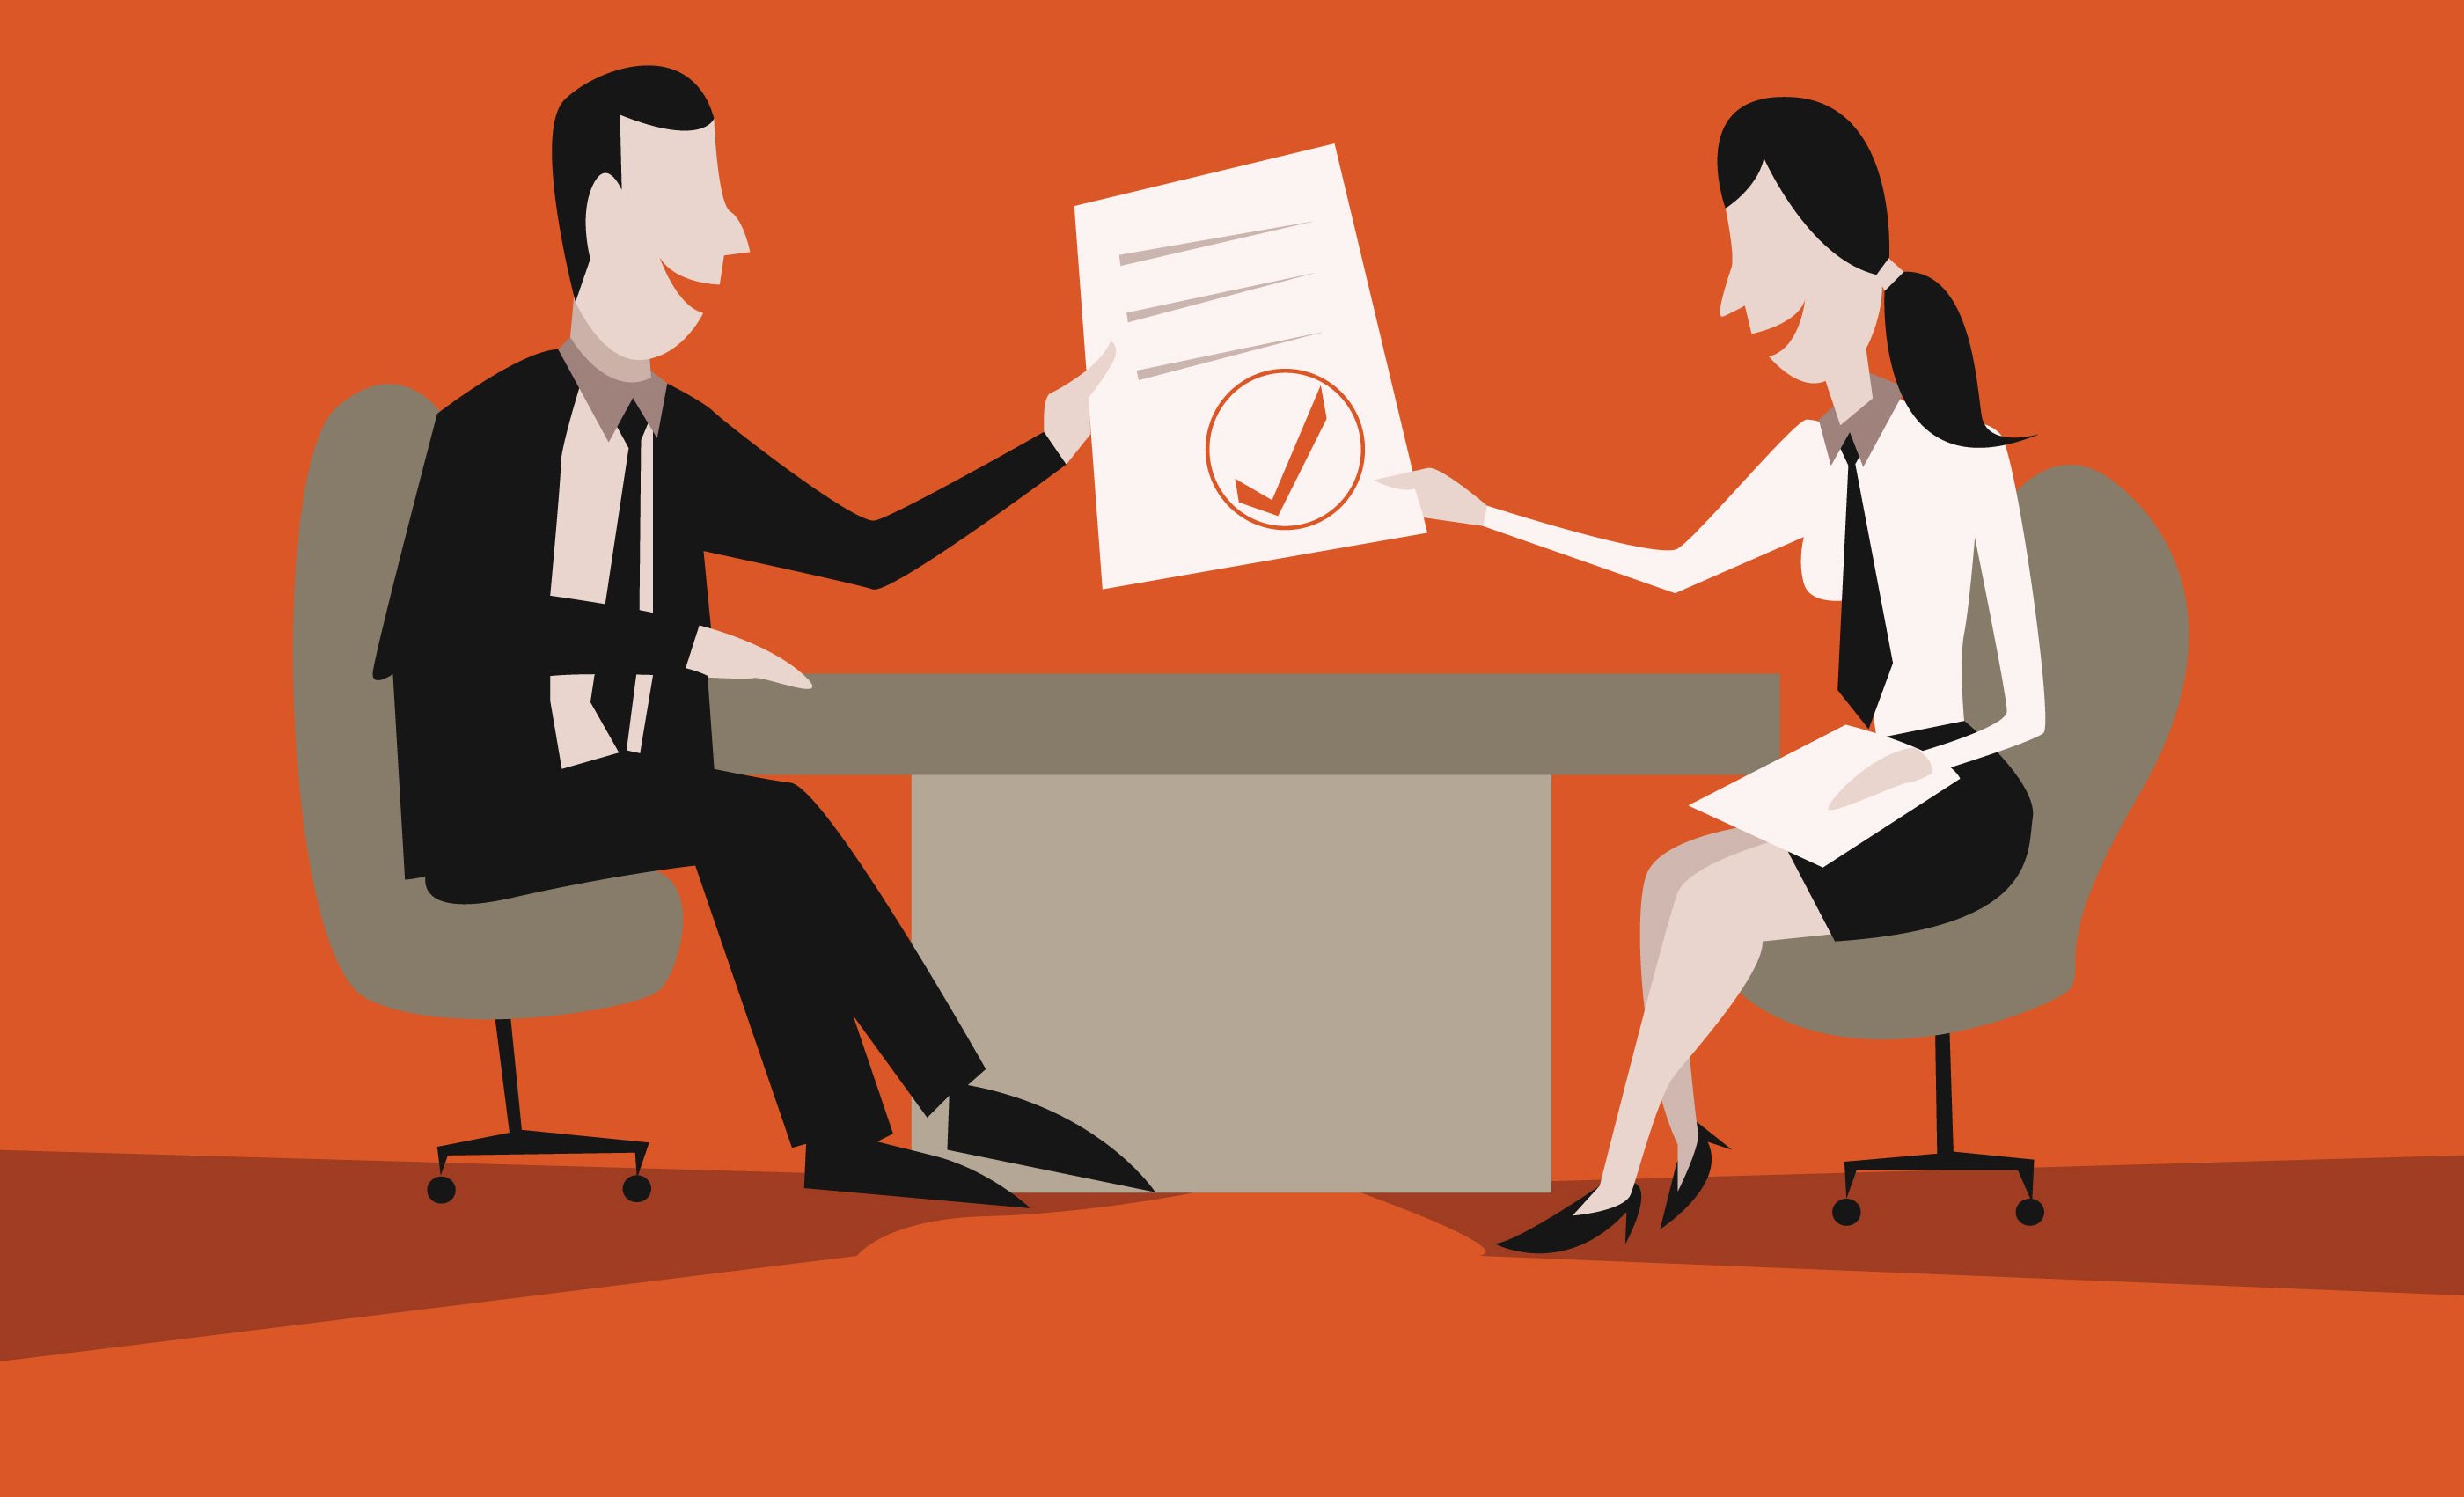 Image of a man and woman engaging in an Interview